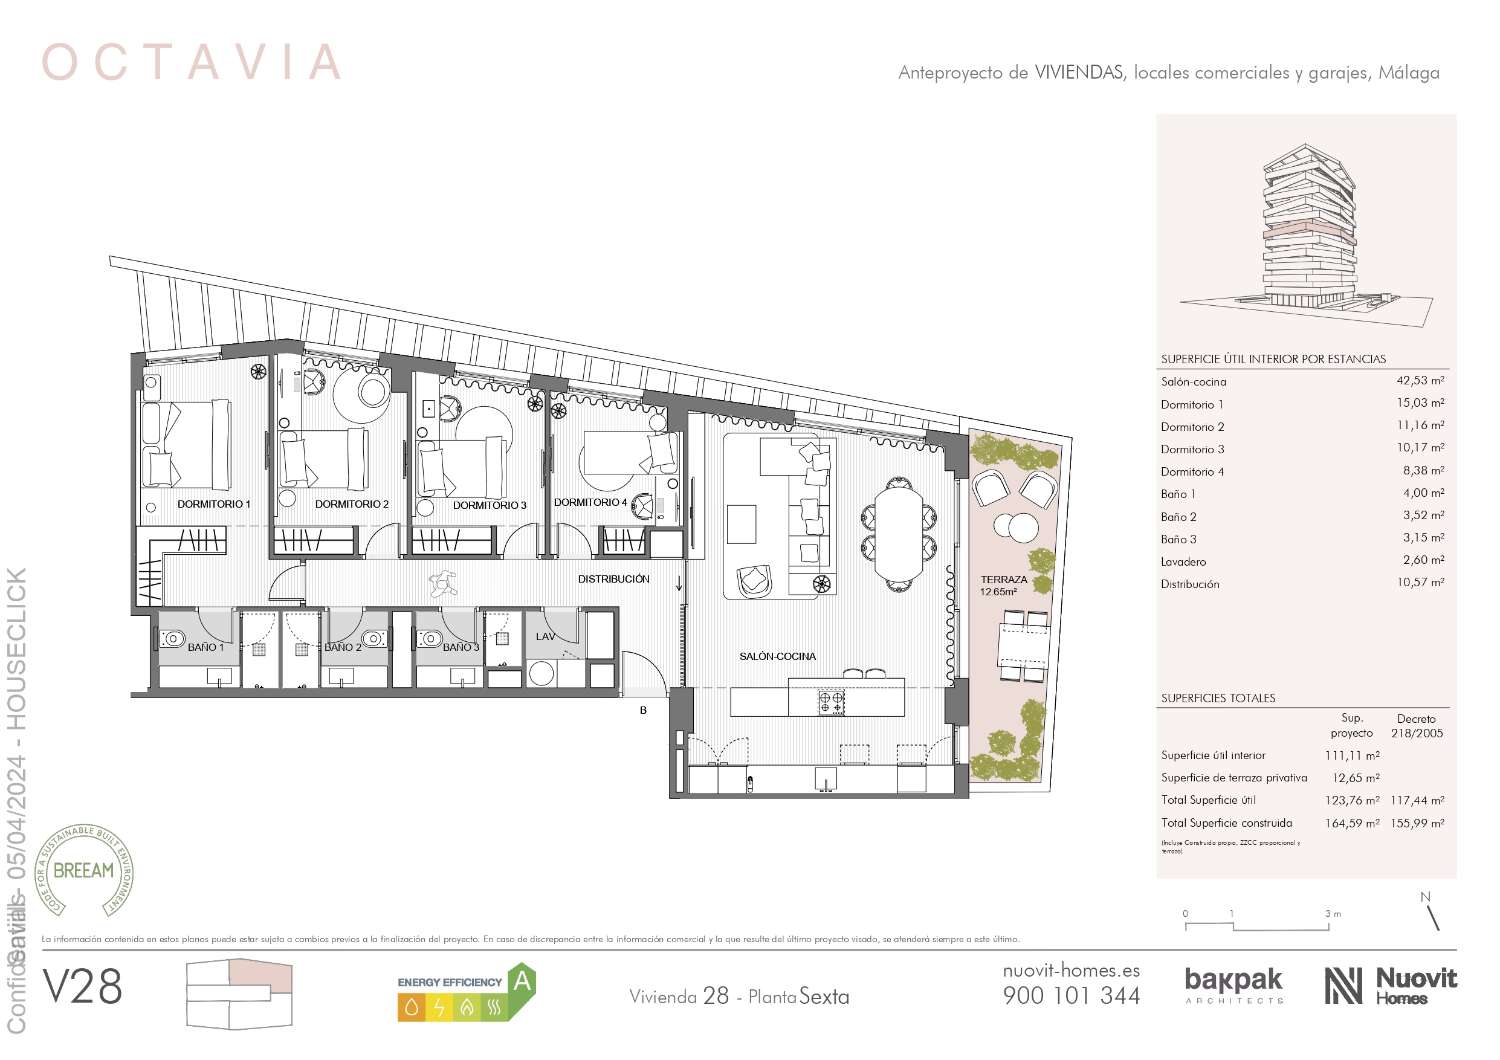 BRAND NEW 4 BEDROOM LUXURY HOMES WITH SEA VIEWS LAST 4 UNITS! From €1,560,000